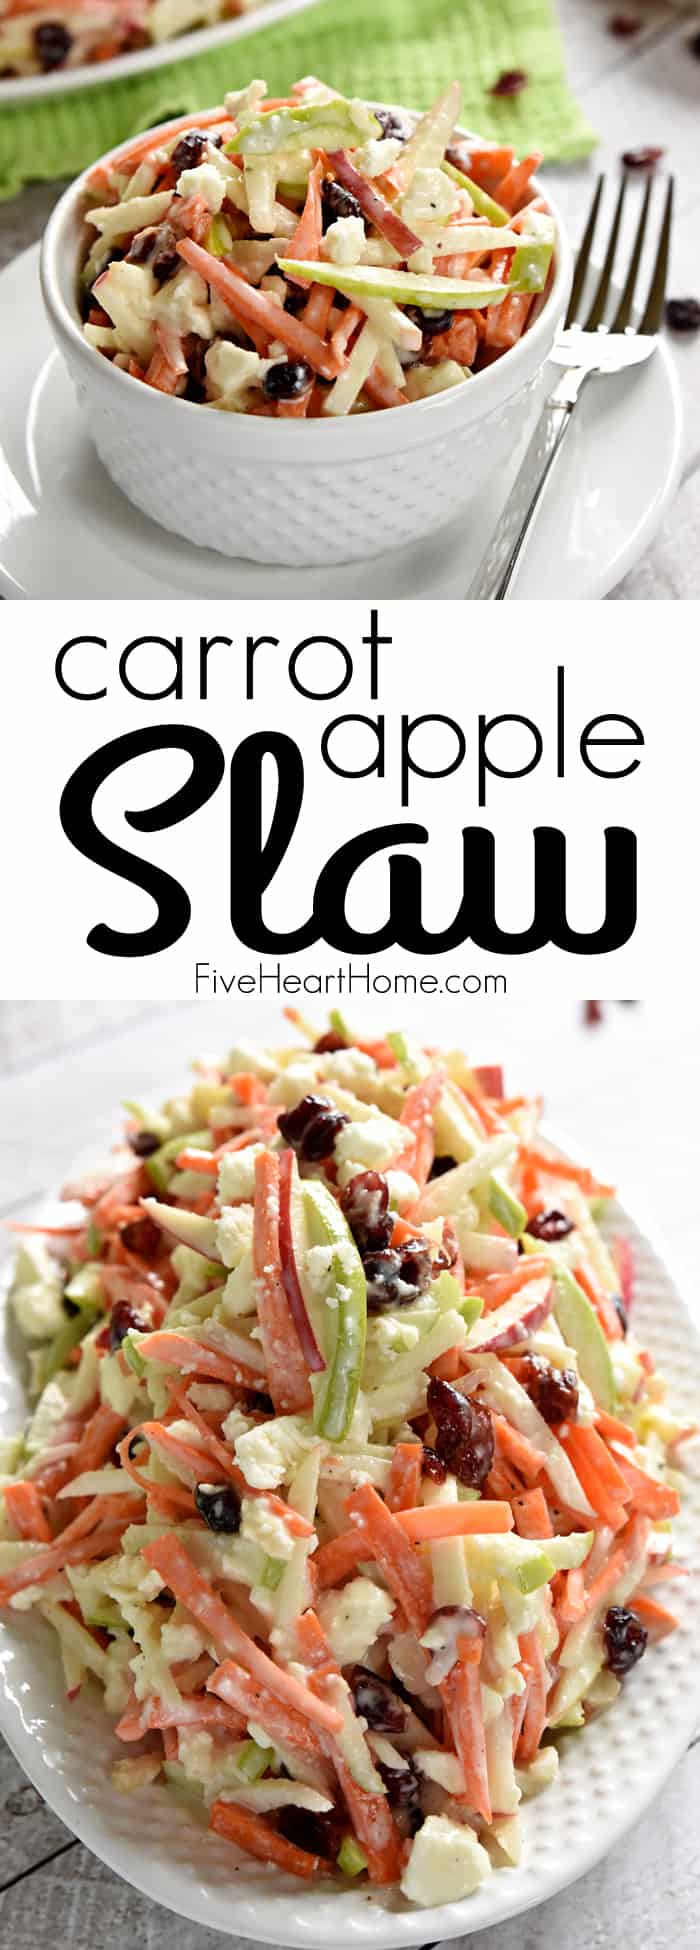 Carrot Apple Slaw ~ with crunchy carrots, sweet and tart apples, dried cranberries, salty feta cheese, and a creamy dressing, this salad is a refreshingly sweet and savory side dish for summer! | FiveHeartHome.com via @fivehearthome